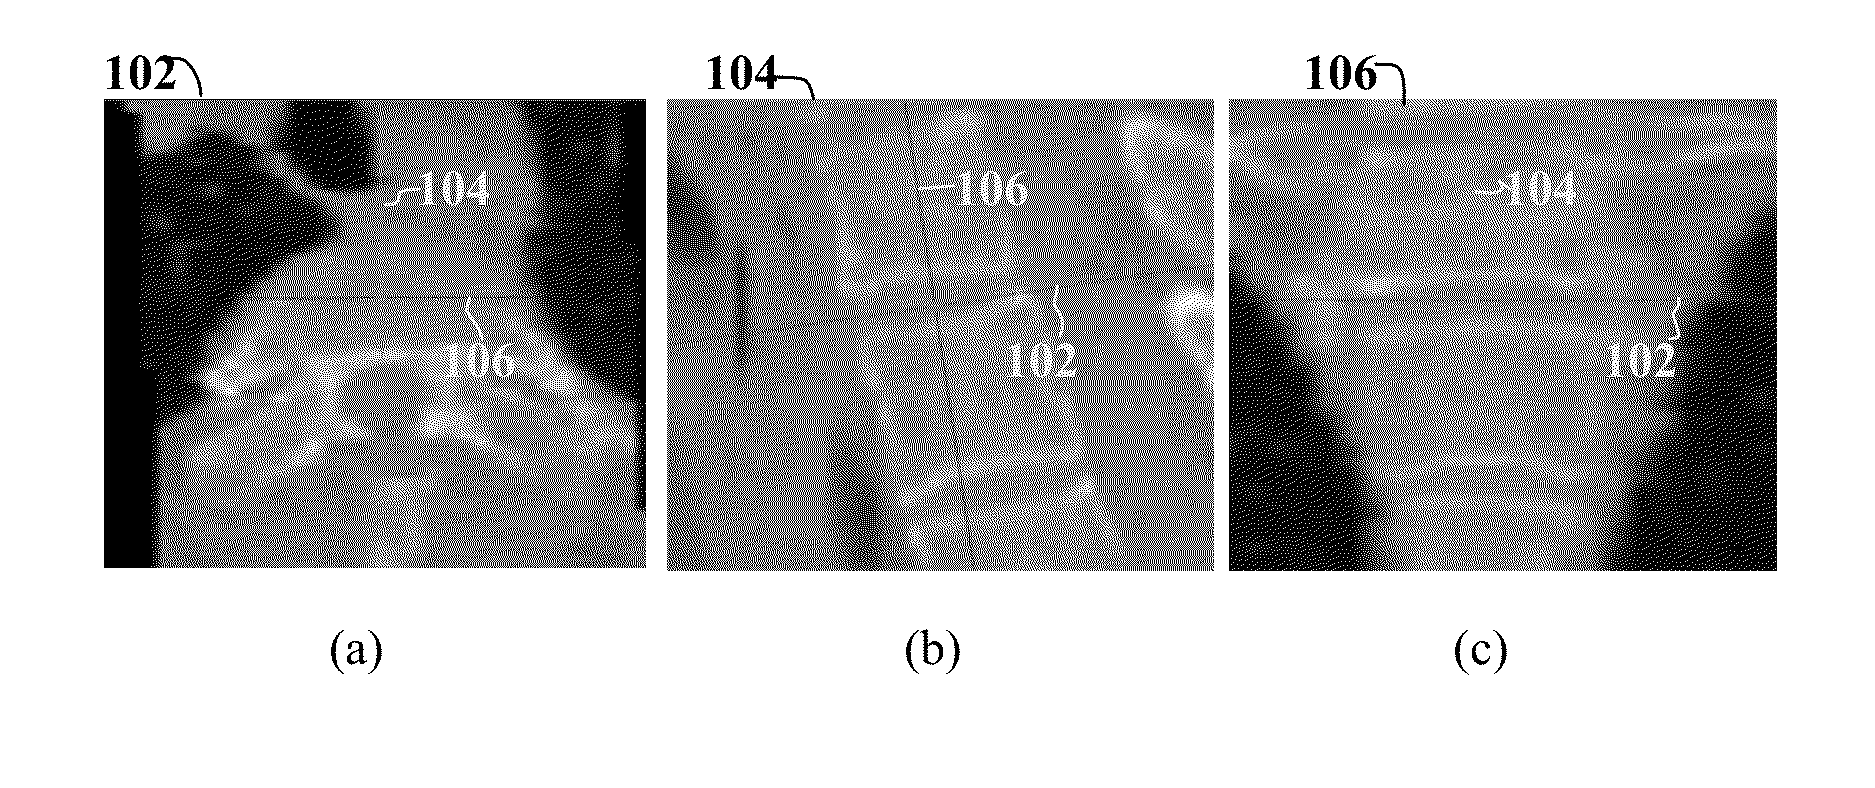 Method and System for On-Site Learning of Landmark Detection Models for End User-Specific Diagnostic Medical Image Reading